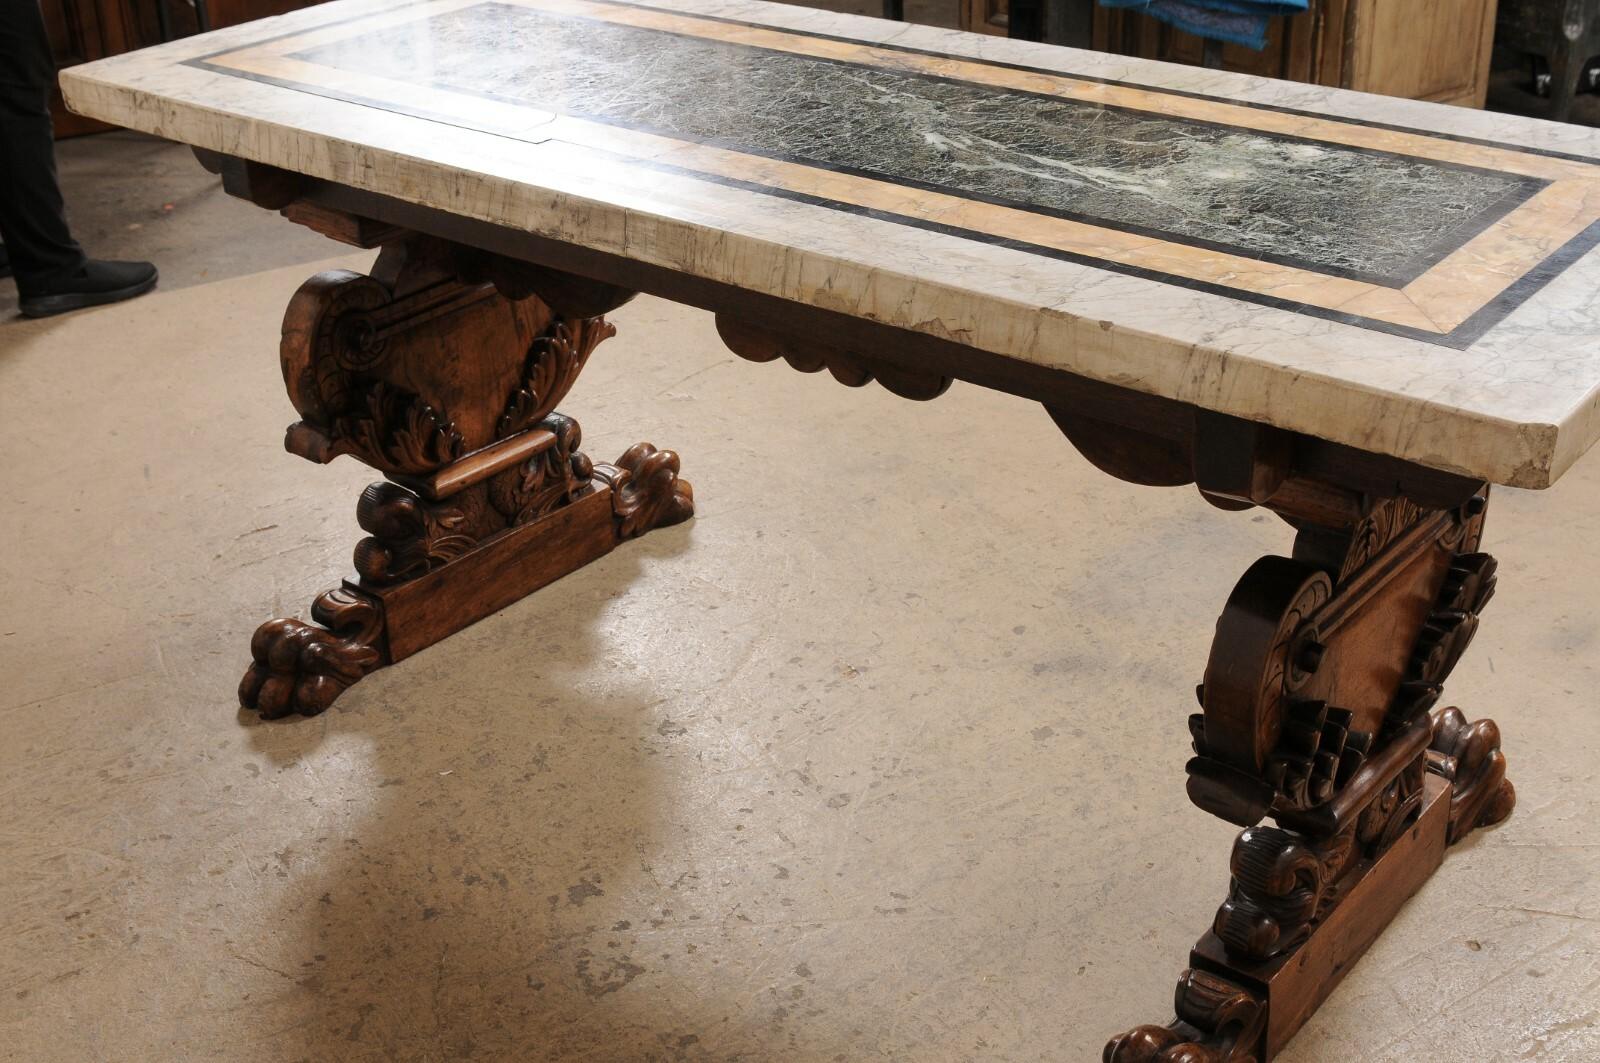 A Gorgeous 18th C Italian Inlaid Marble Top Table w/Robustly Carved Trestle Legs For Sale 2